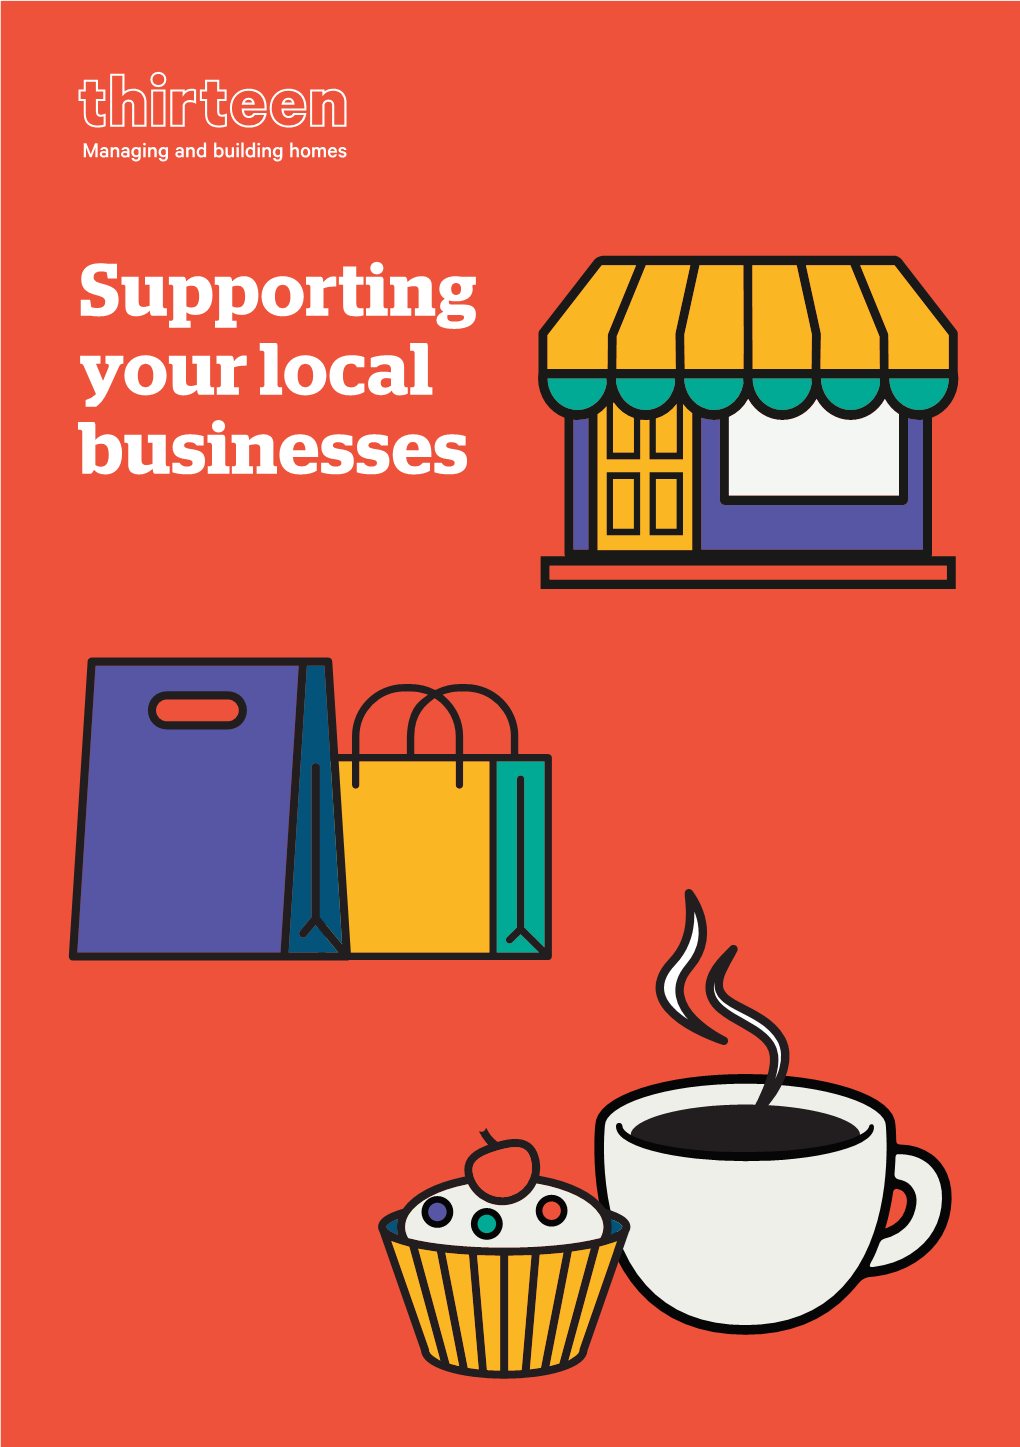 Supporting Your Local Businesses Our Valued Customers Provide Essential and Well-Used Services for Us All in the Heart of Our Communities